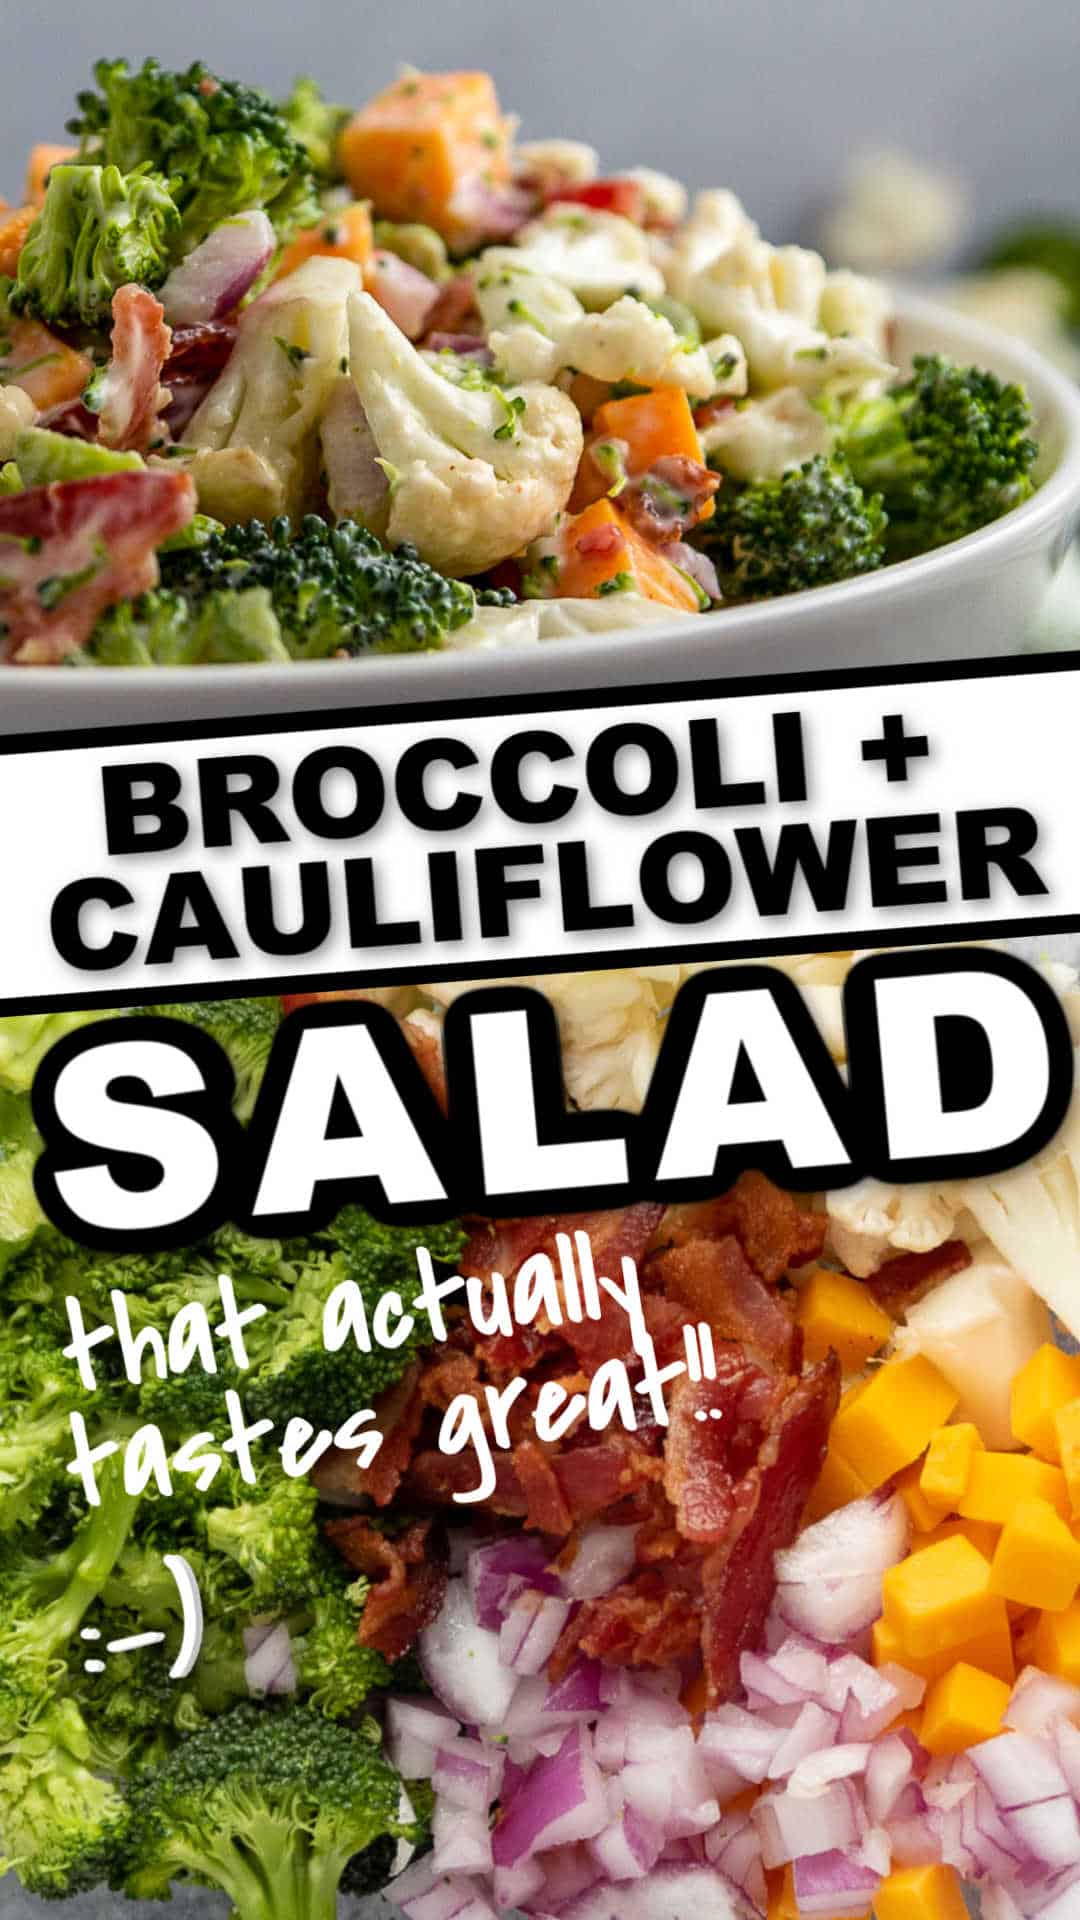 This Broccoli and Cauliflower actually tastes good. Getting in your veggies is no problem with THIS SALAD. Crispy bacon, cheddar cheese, and a creamy dressing go a long way to make this salad taste AMAZING!  #cheerfulcook #broccoli #cauliflower #bacon #salad #summer ♡ cheerfulcook.com via @cheerfulcook